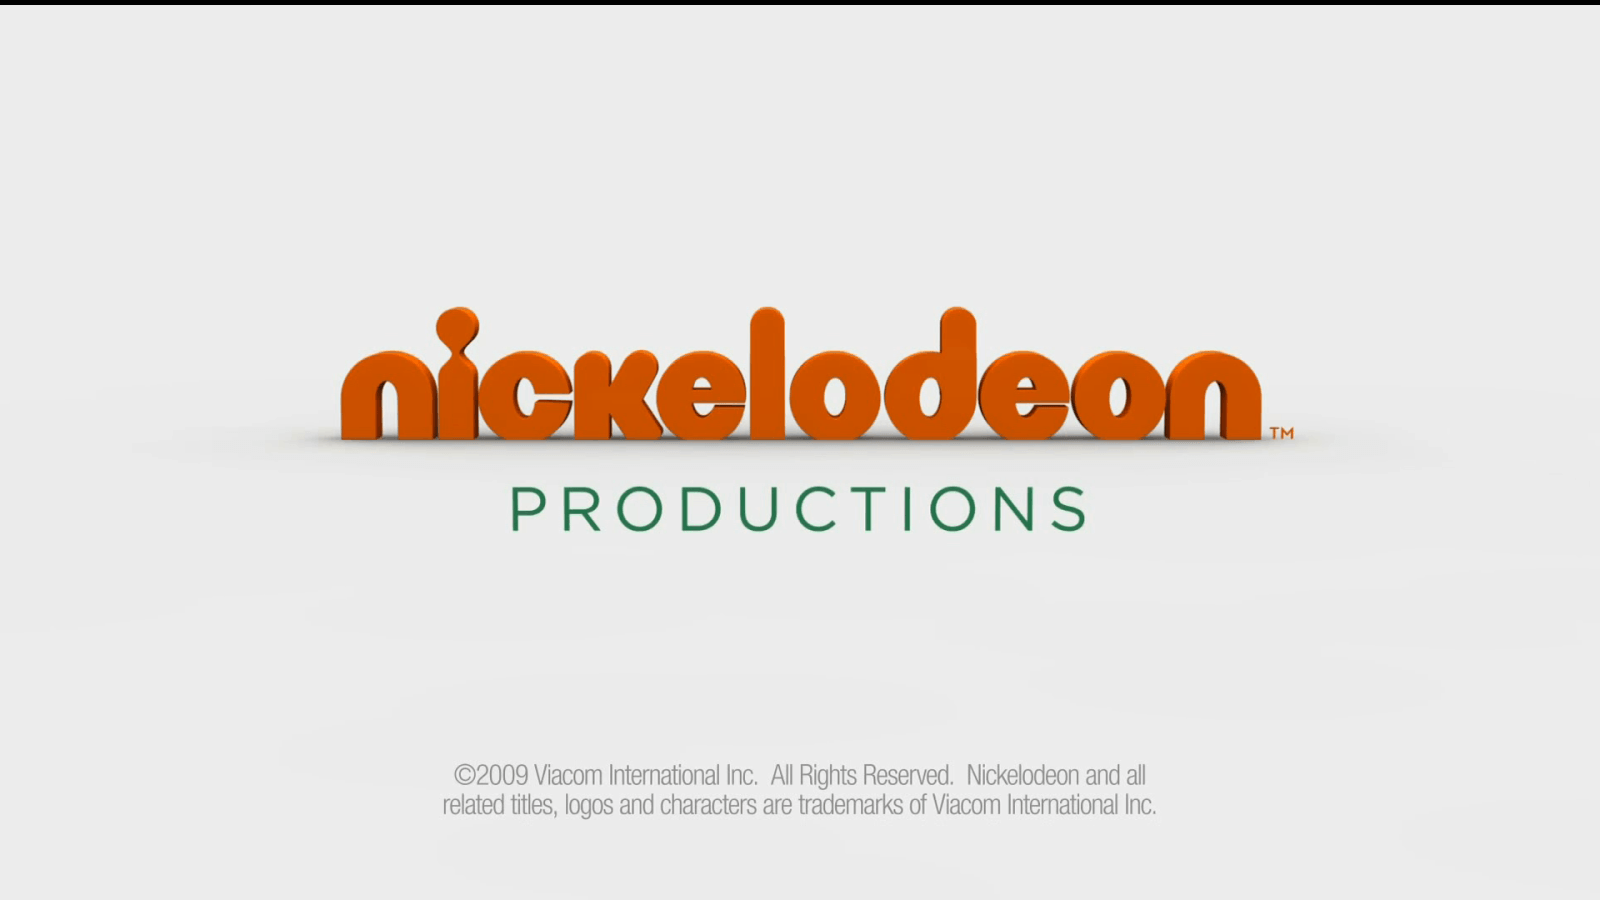 Nickelodeon Productions Logo - Image - Nickelodeon productions.png | Logopedia | FANDOM powered by ...